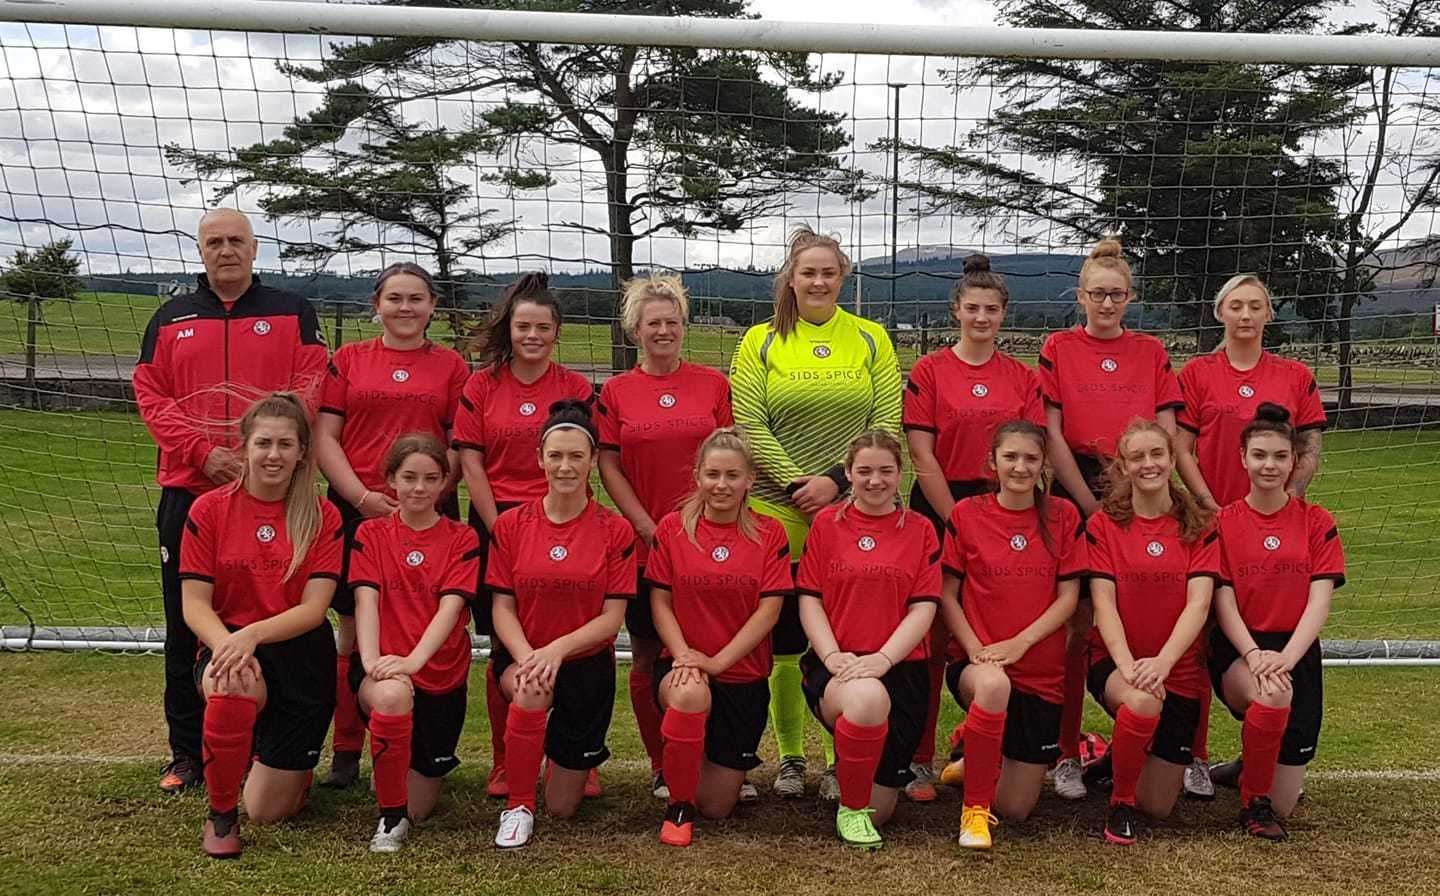 Brora Rangers picked up their first win of the season.